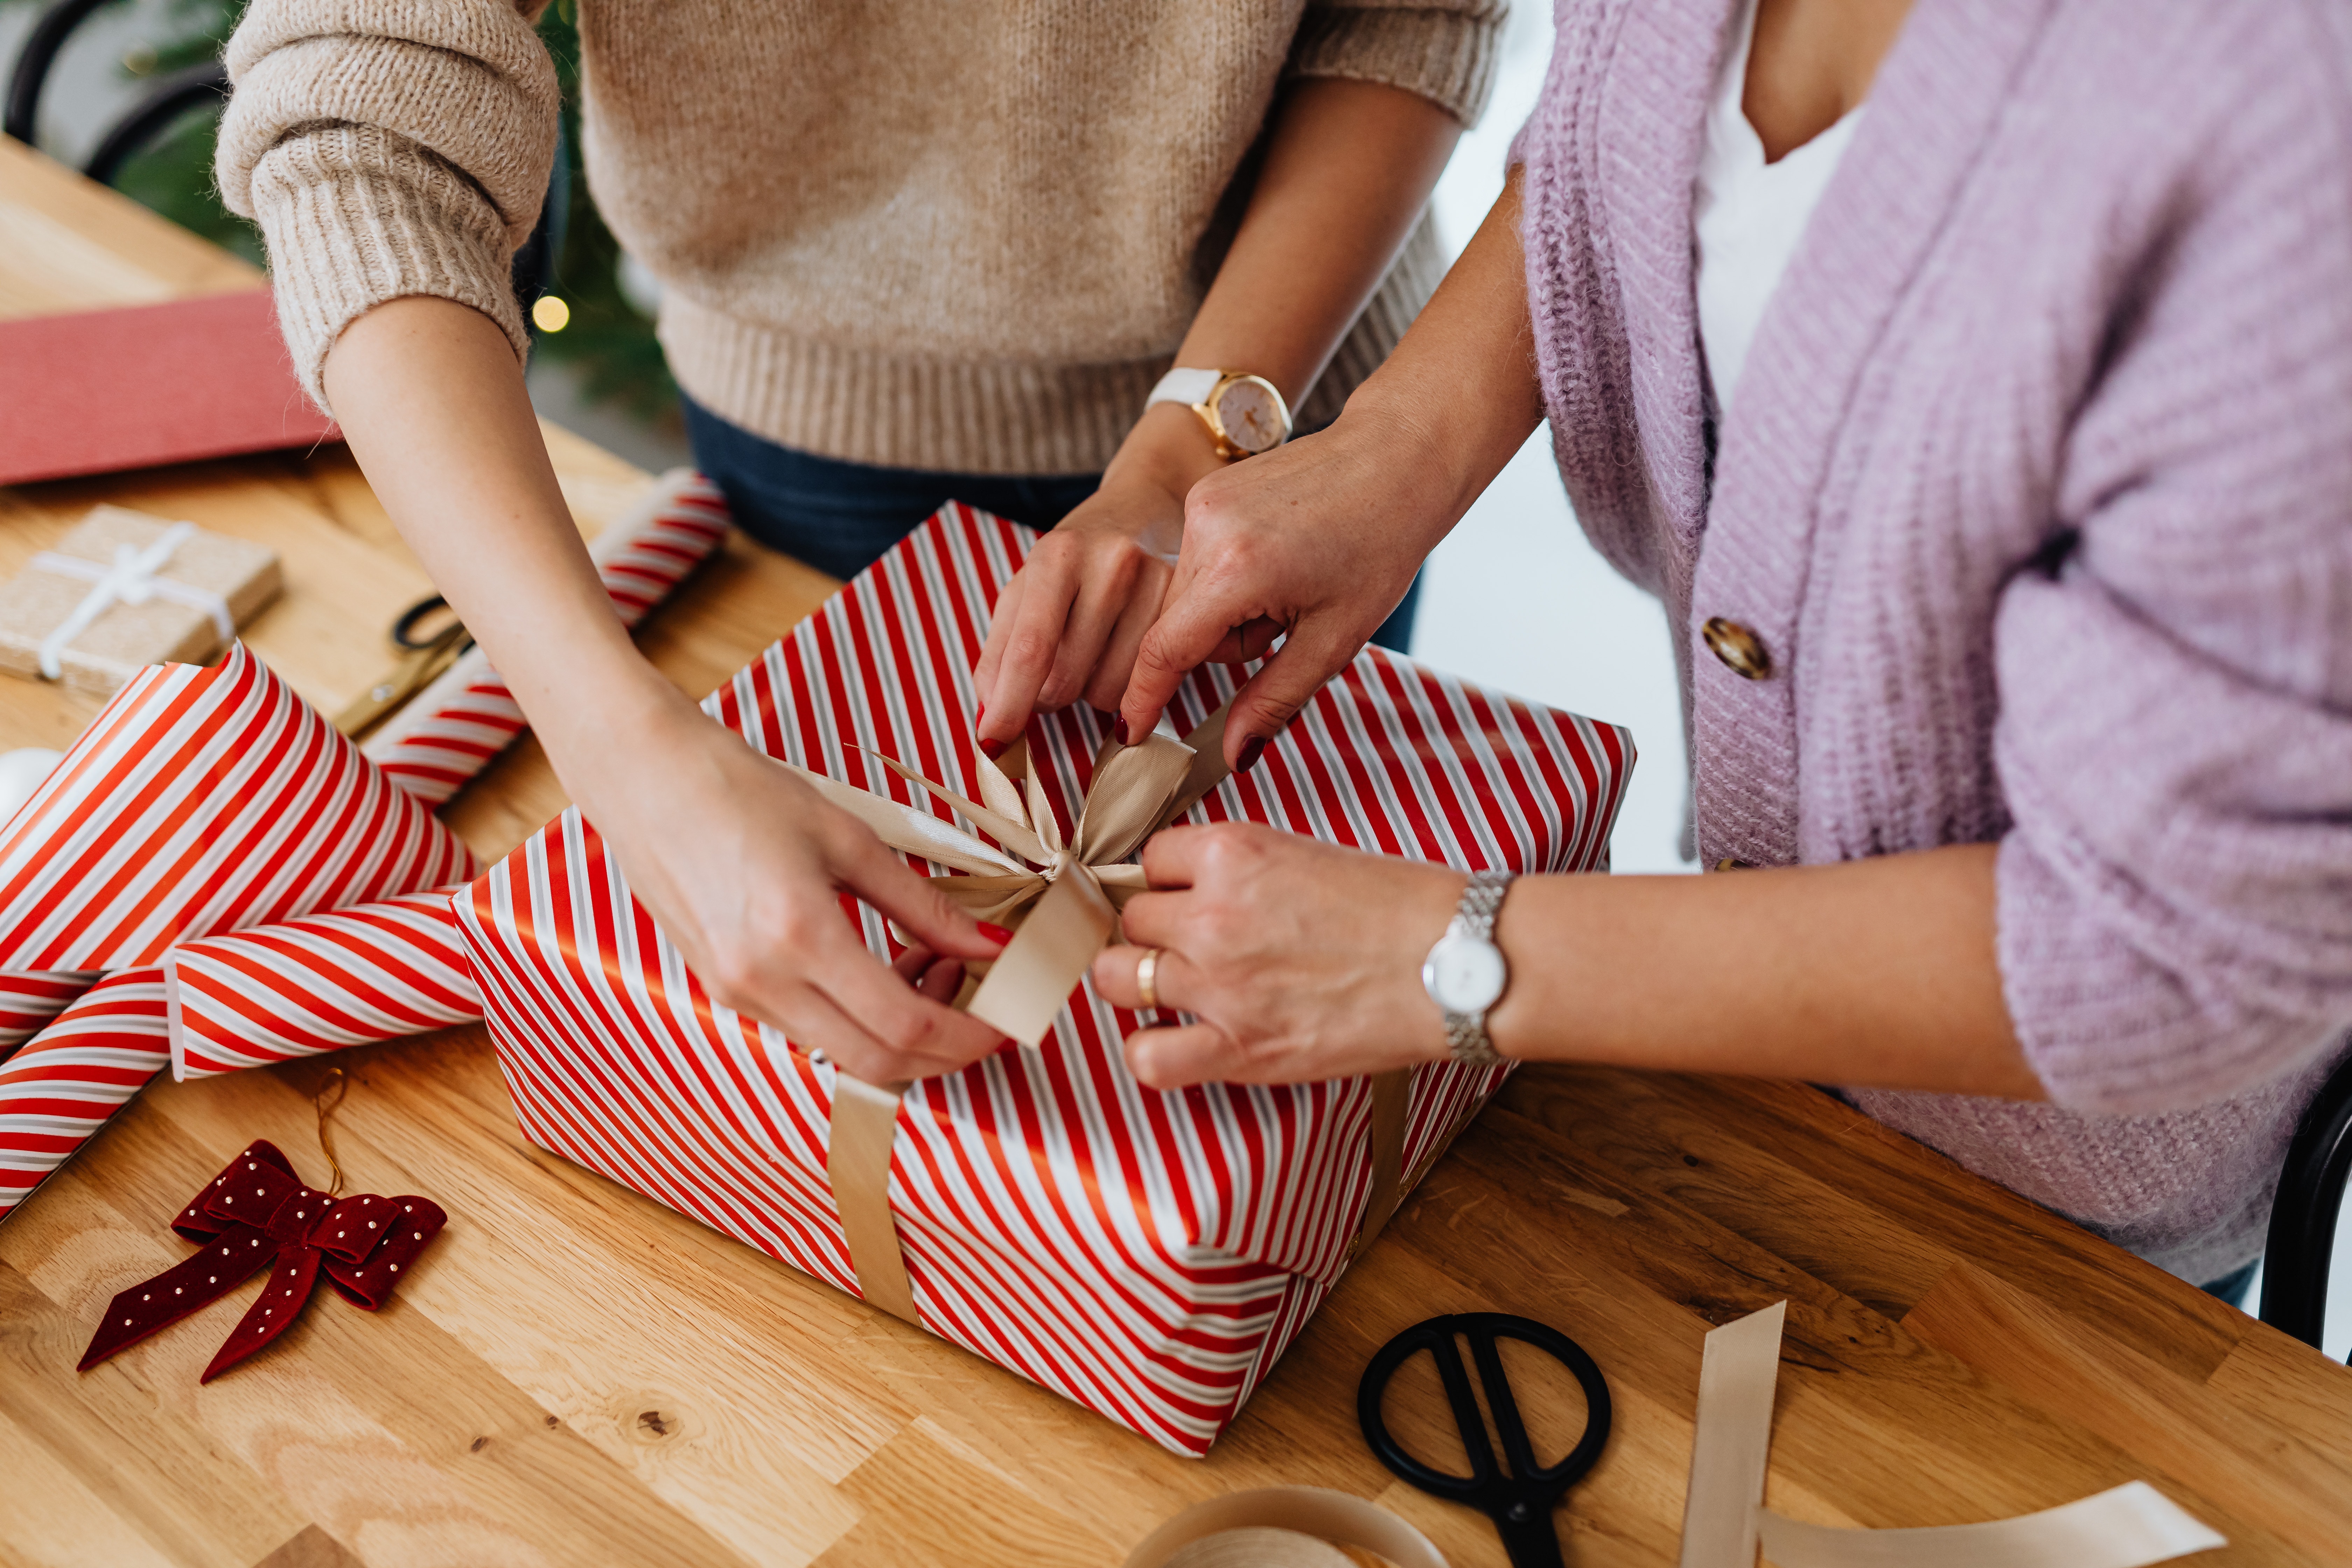 How to Find the Perfect Gift for Any Occasion?